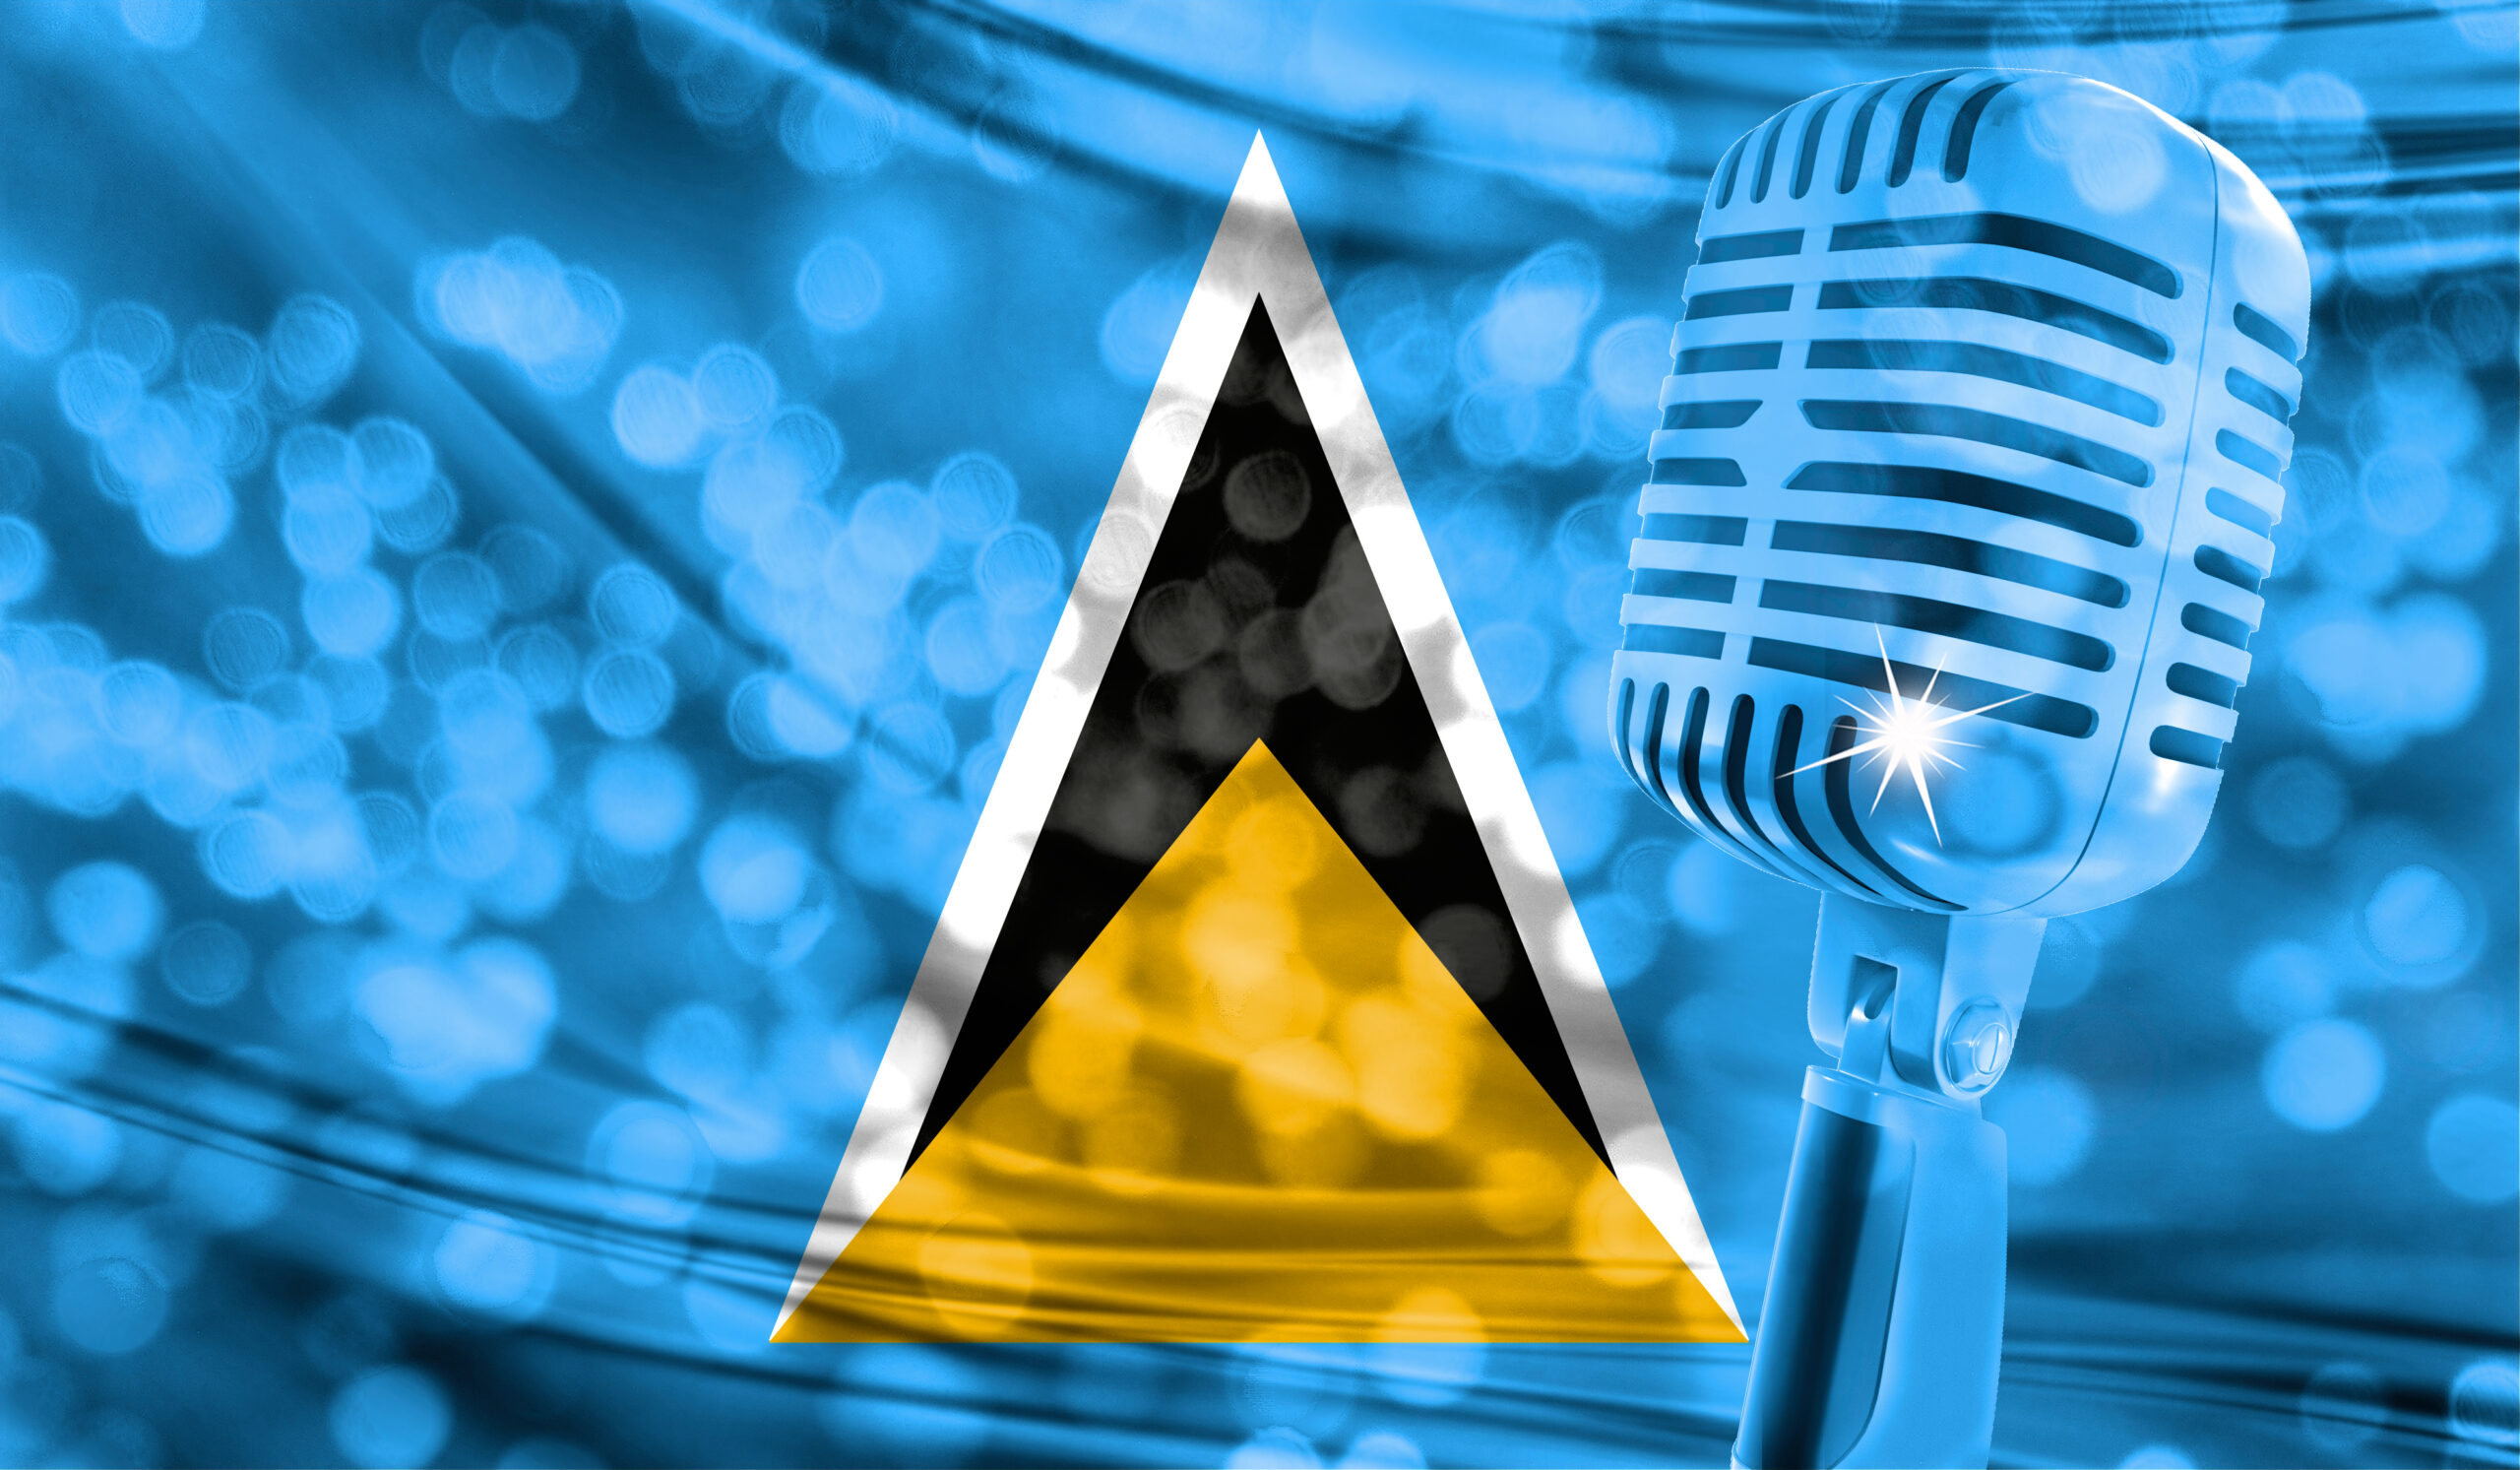 Microphone,On,A,Background,Of,A,Blurry,Saint,Lucia,Flag